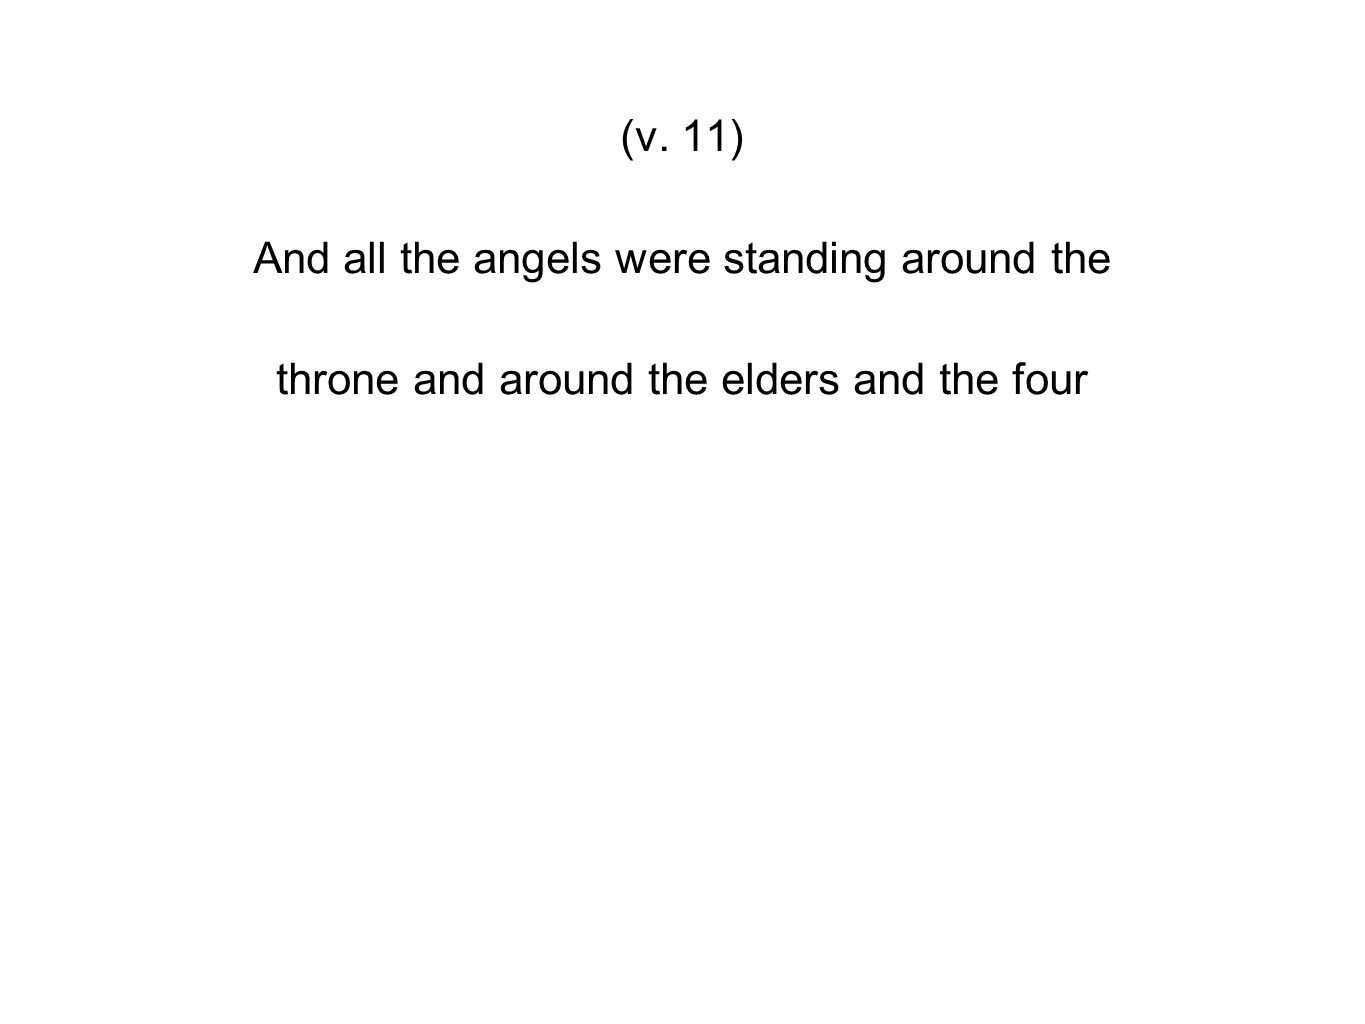 (v. 11) And all the angels were standing around the throne and around the elders and the four